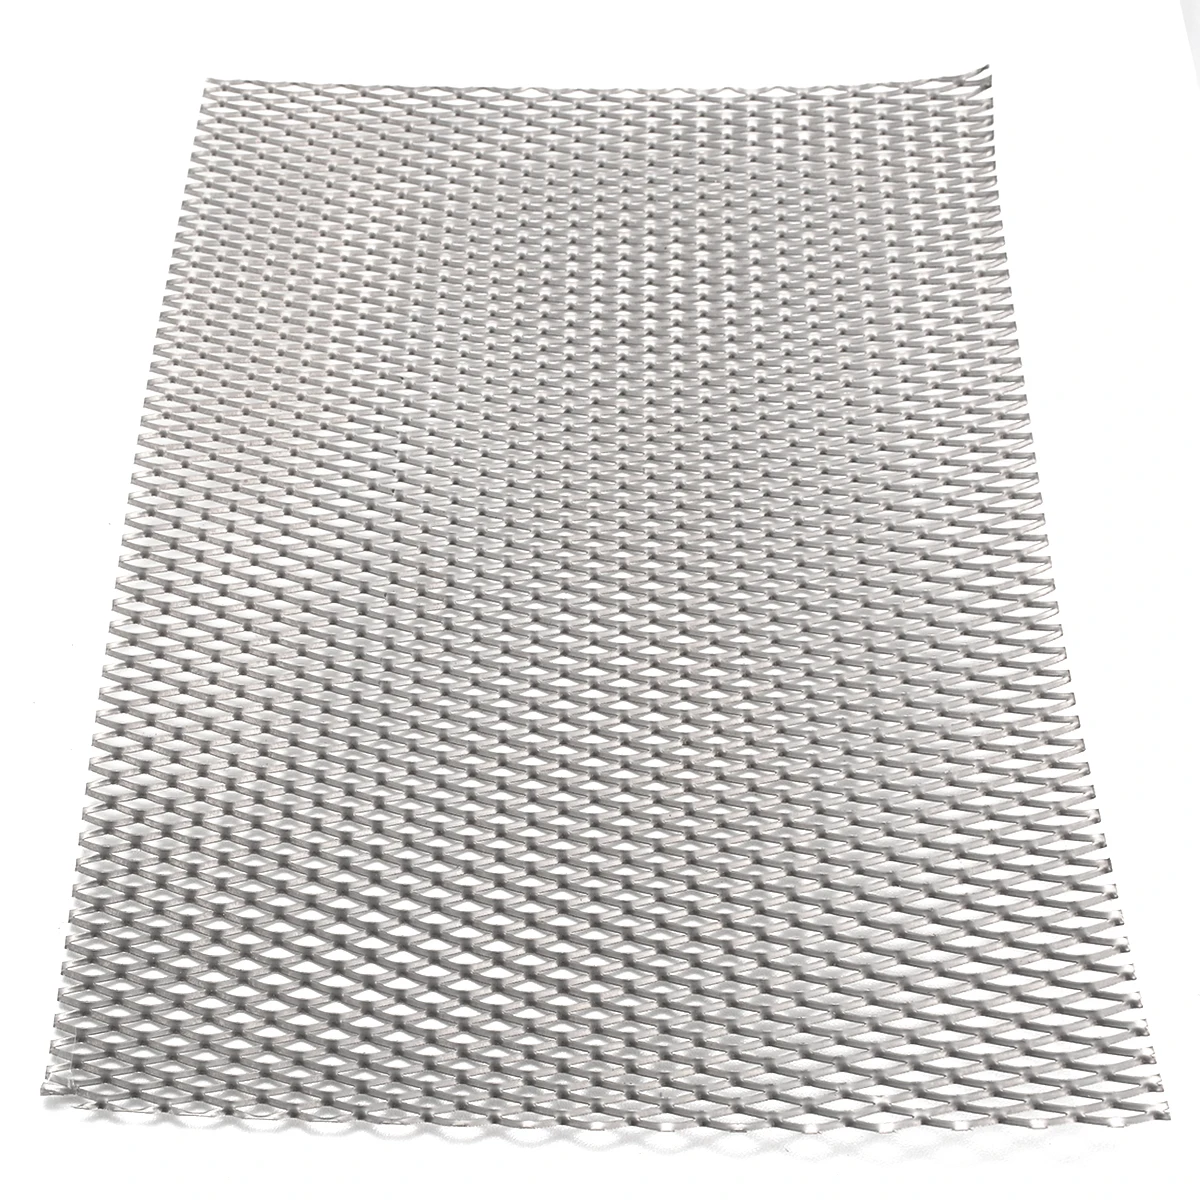 200mm*300mm*0.5mm Metal Titanium Mesh Sheet Perforated Plate Expanded Mesh 